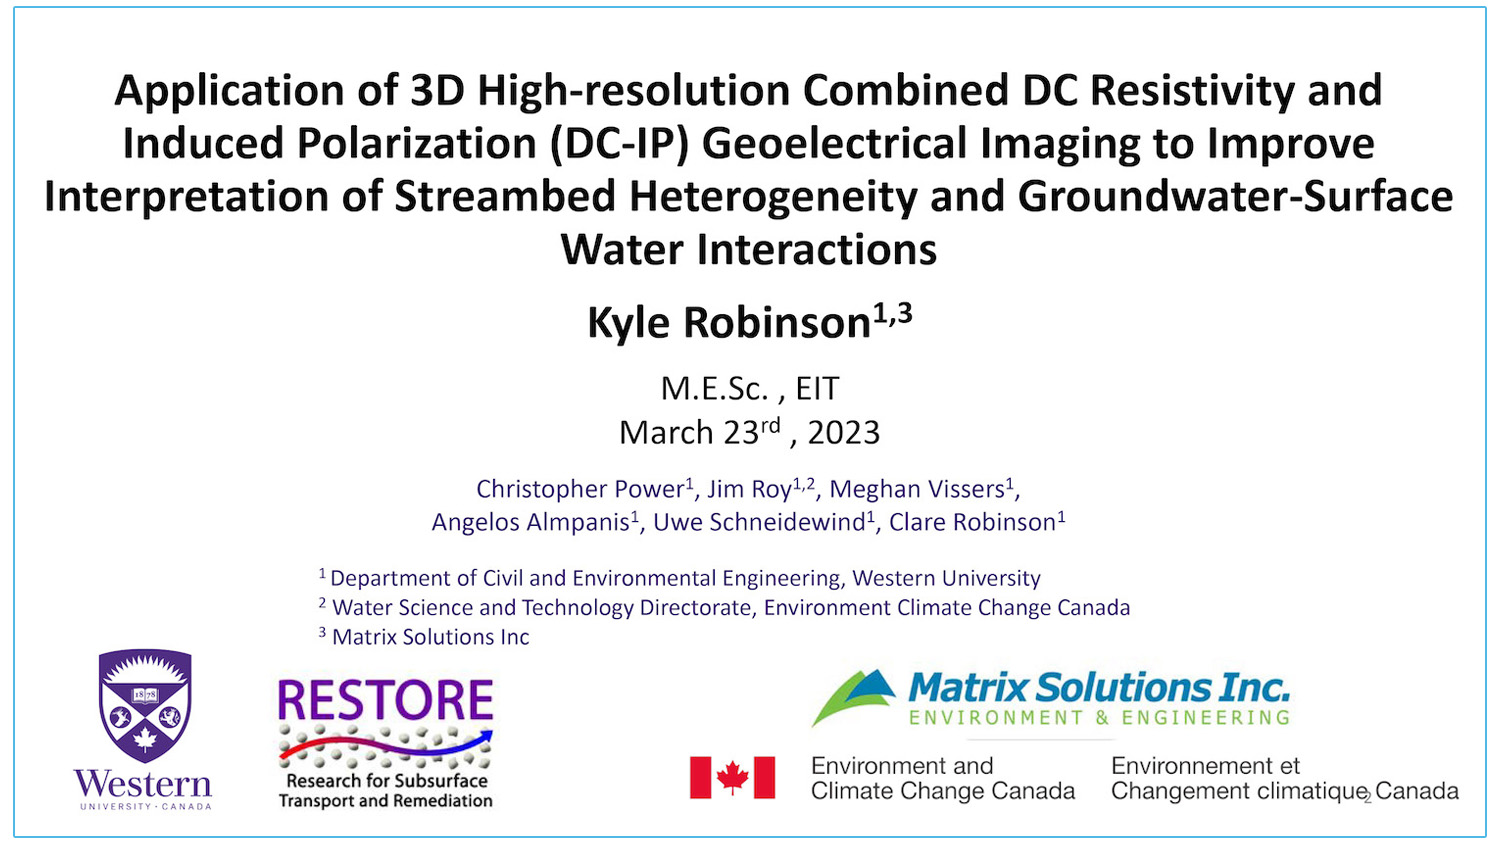 Application of 3D High-resolution Combined DC Resistivity and Induced Polarization DC-IP Geoelectrical Imaging to Improve Interpretation of Streambed Heterogeneity and Groundwater-Surface Water Interactions - Presenter - Kyle Robinson, Matrix Solutions